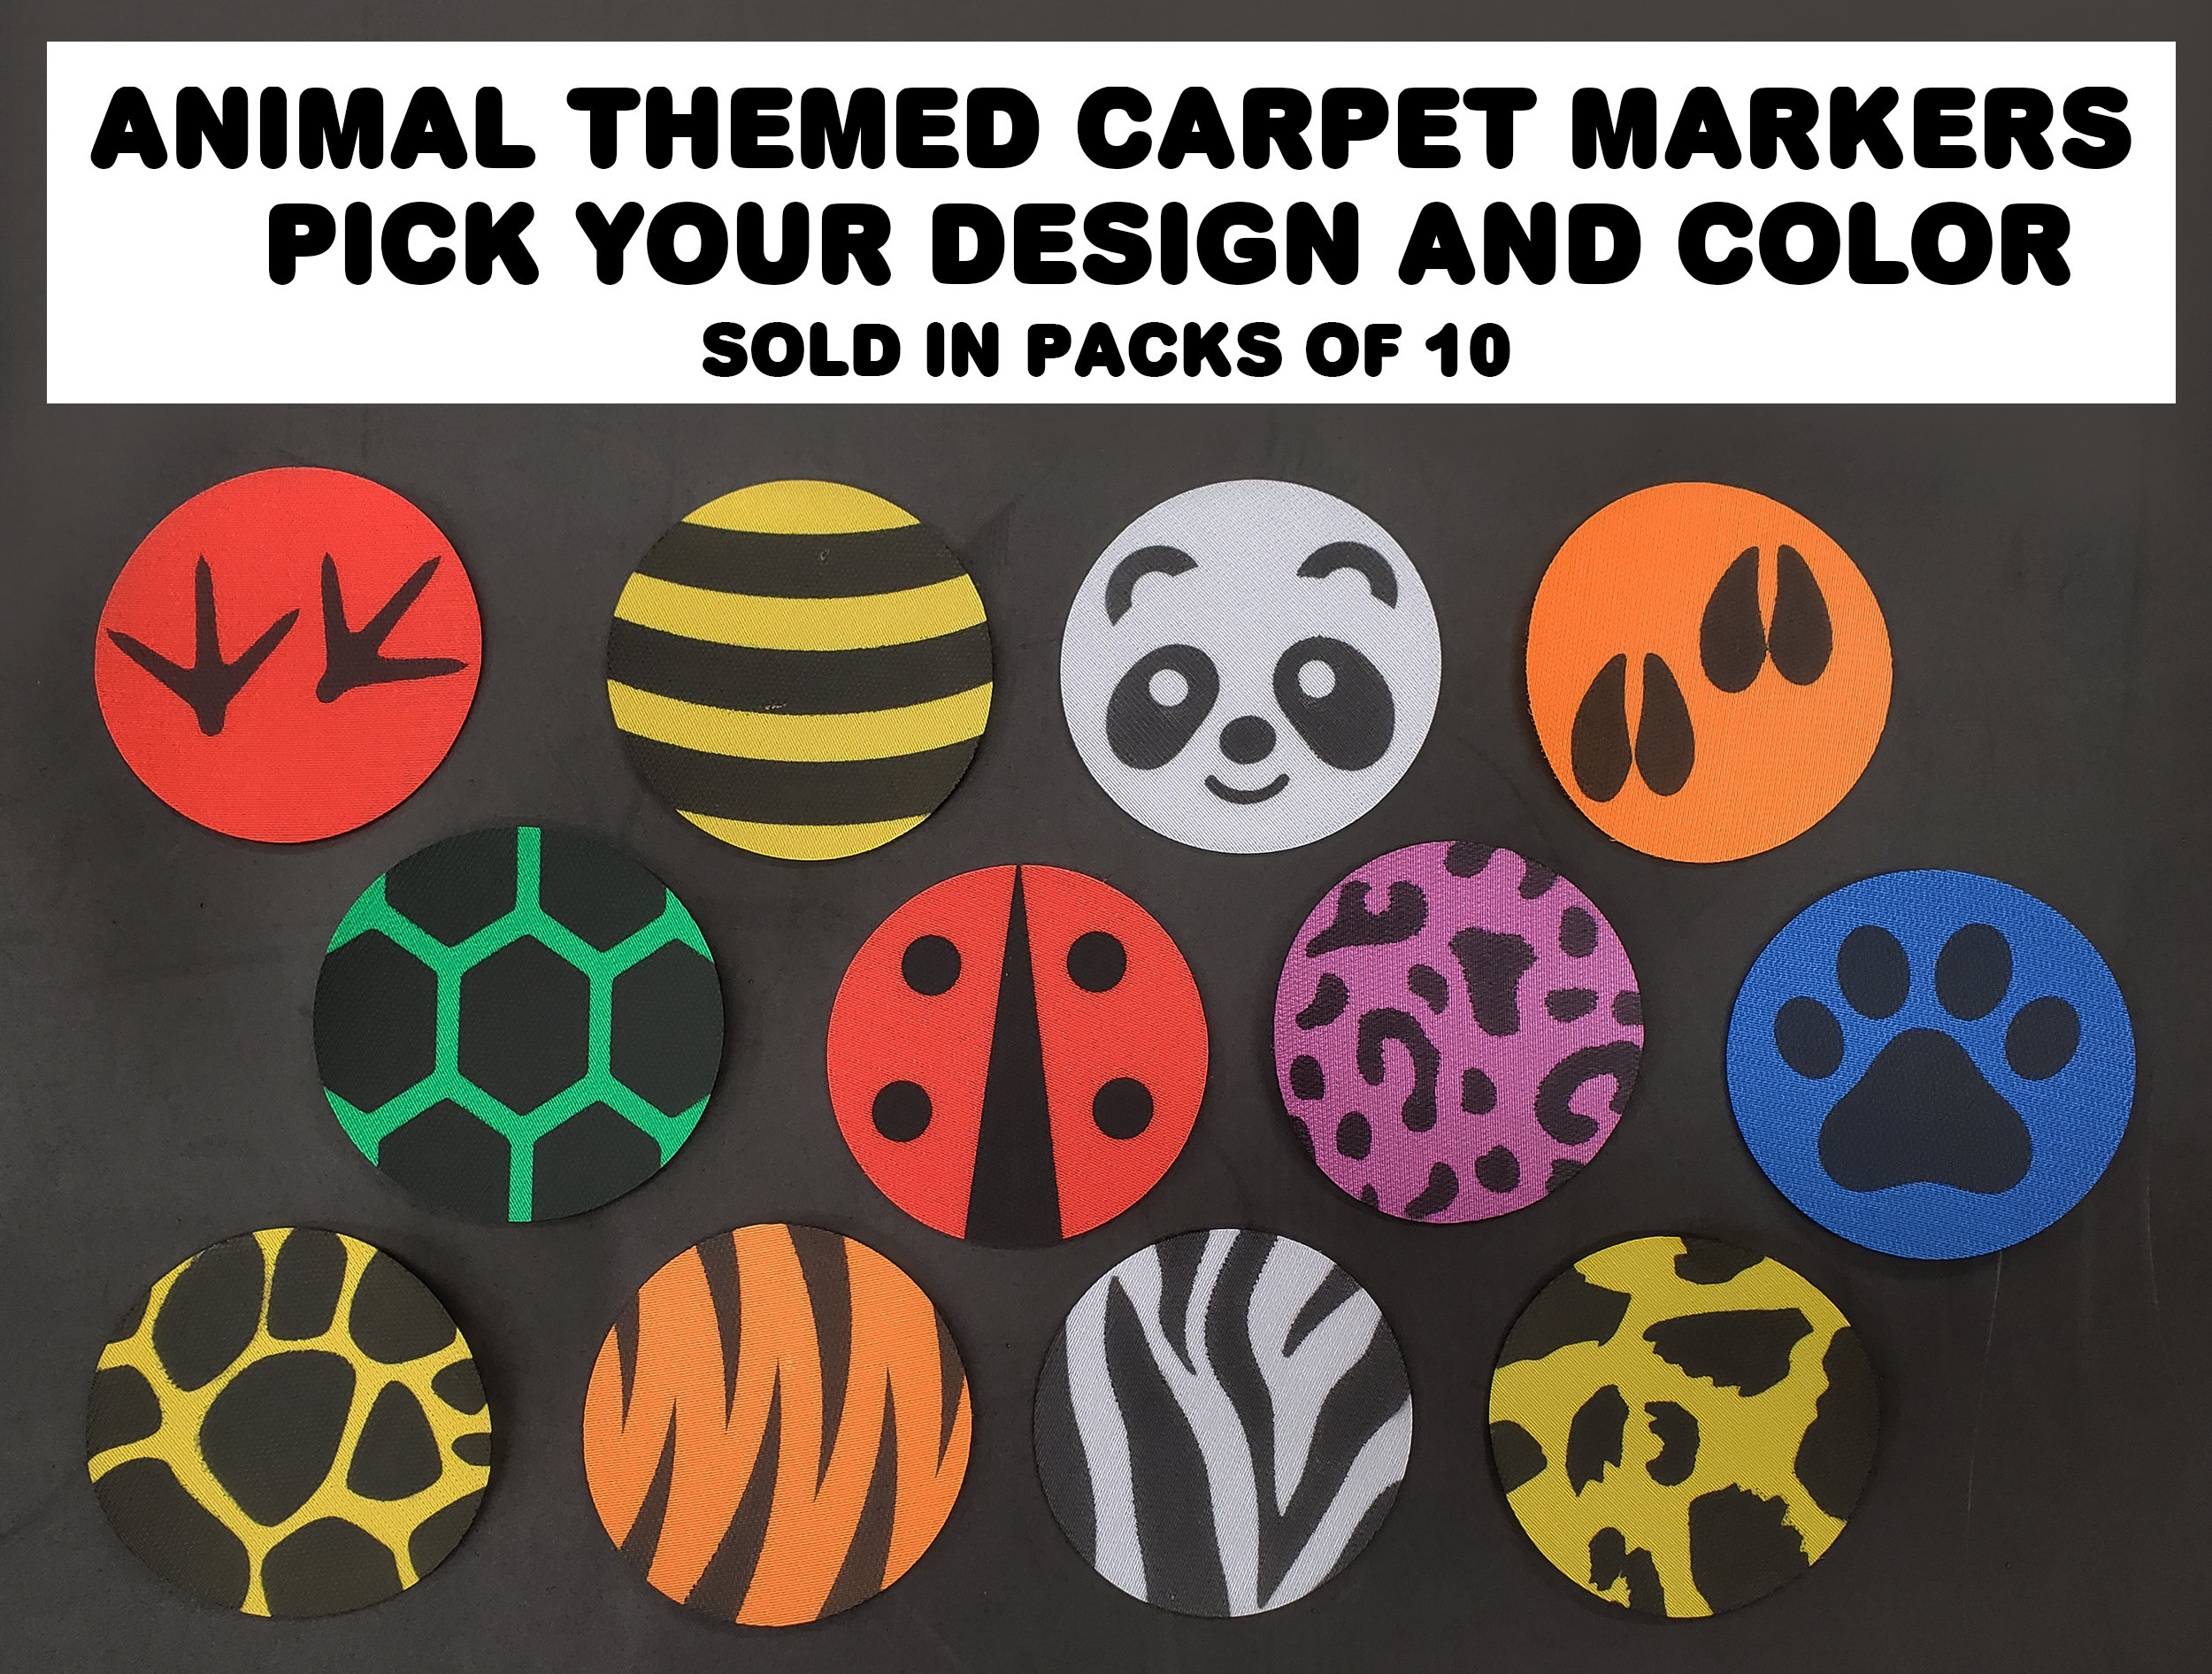  Parliky 40pcs Carpet Markers Stickers for Outdoor